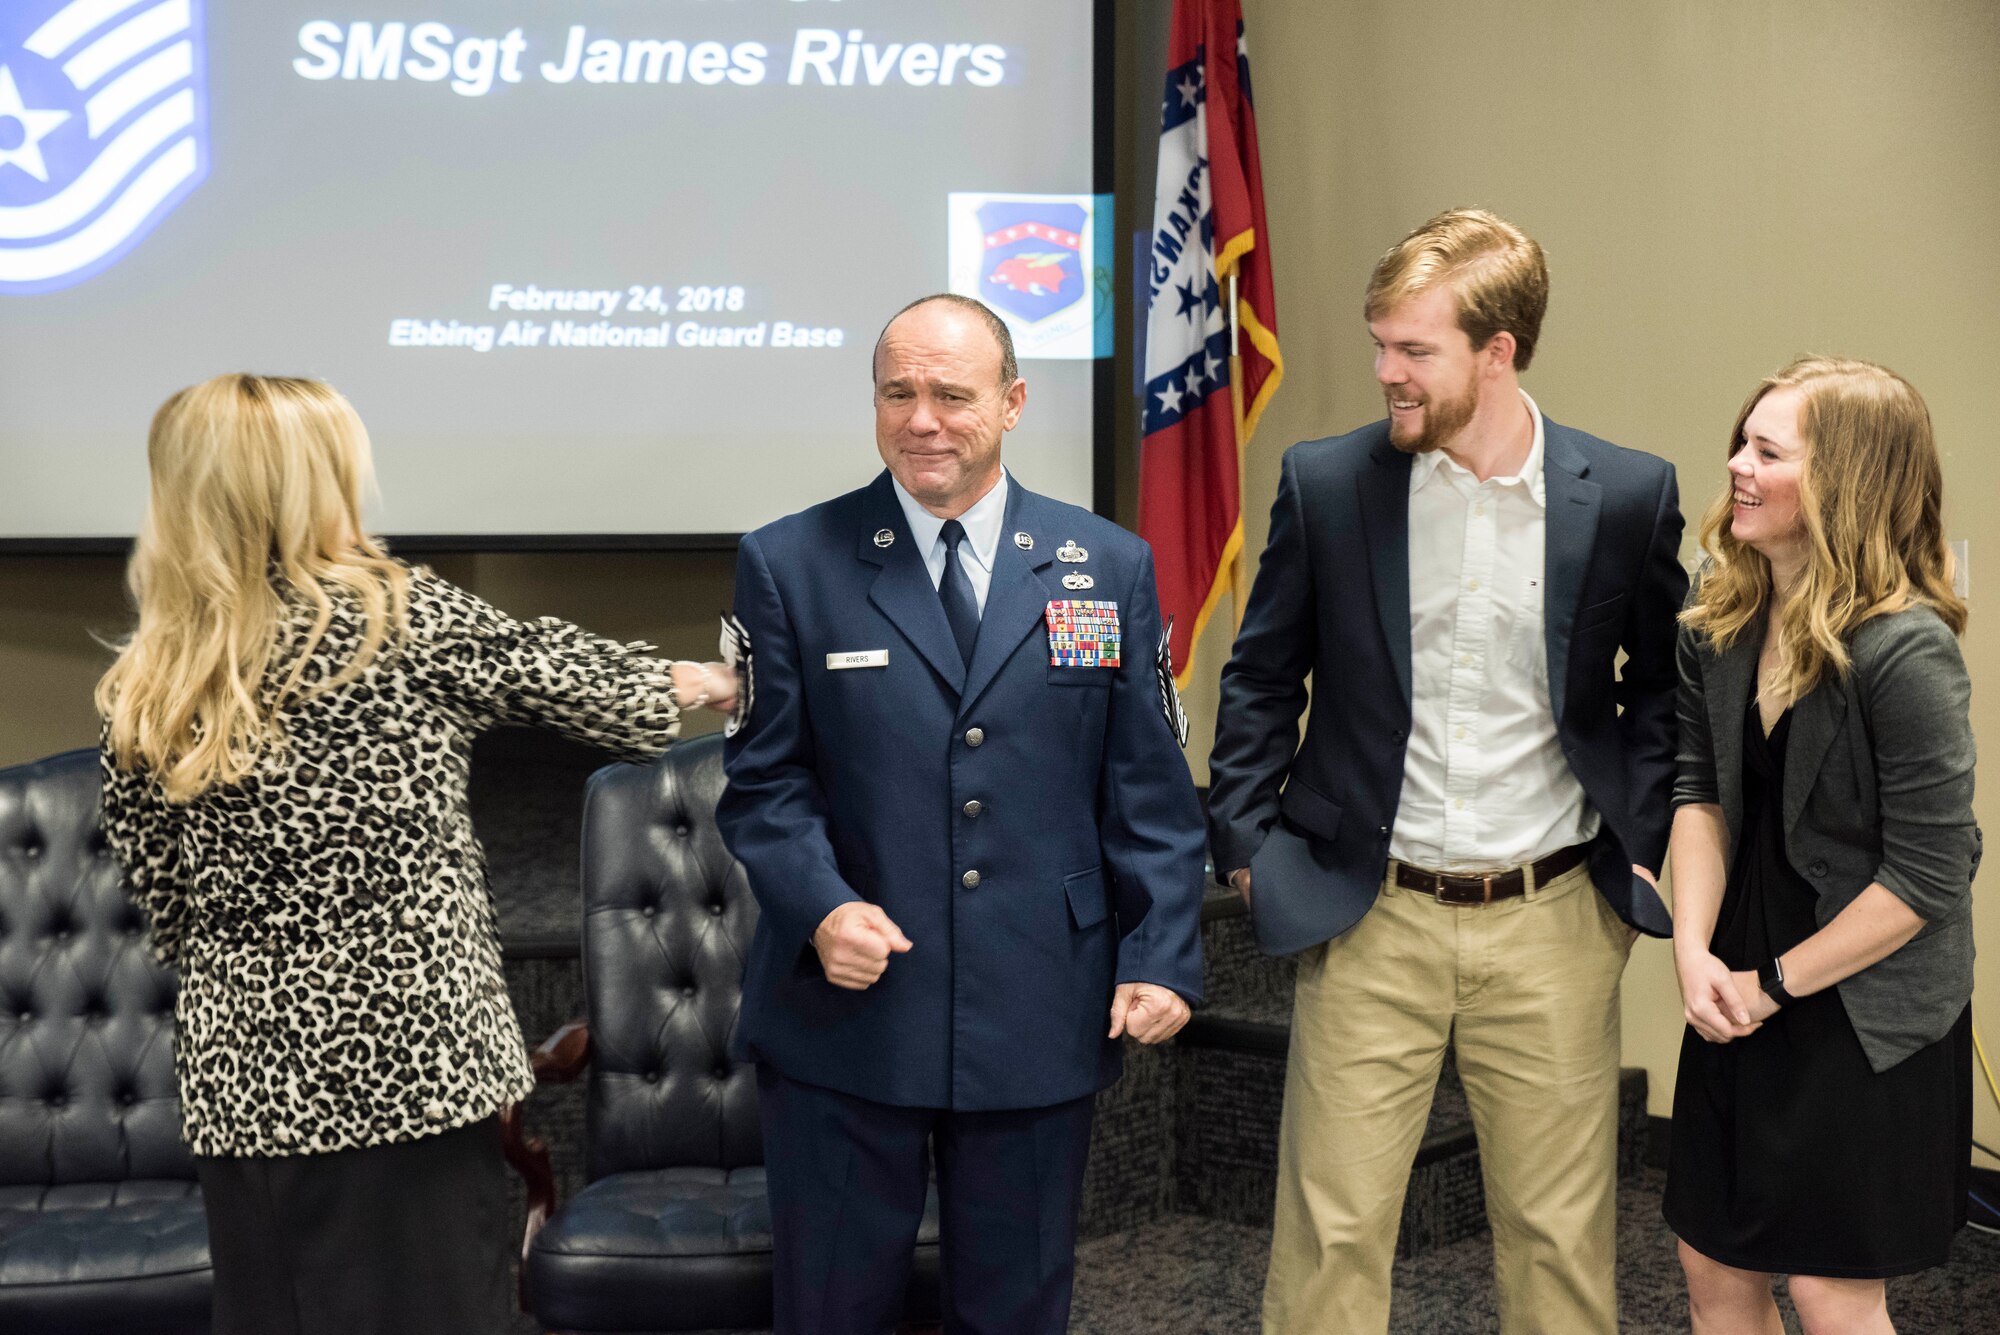 James W. Rivers, 123rd Intelligence Squadron Superintendent, braces as family members tack on stripes during his Chief Master Sgt. Promotion at Ebbing Air National Guard Base, Fort Smith, Ark., Feb. 24, 2018.  Rivers enlisted in the Air Force in July, 1986, and has served vital roles in the intelligence community in both Active Duty and the Air National Guard. (U.S. Air National Guard photo by Senior Airman Matthew Matlock)